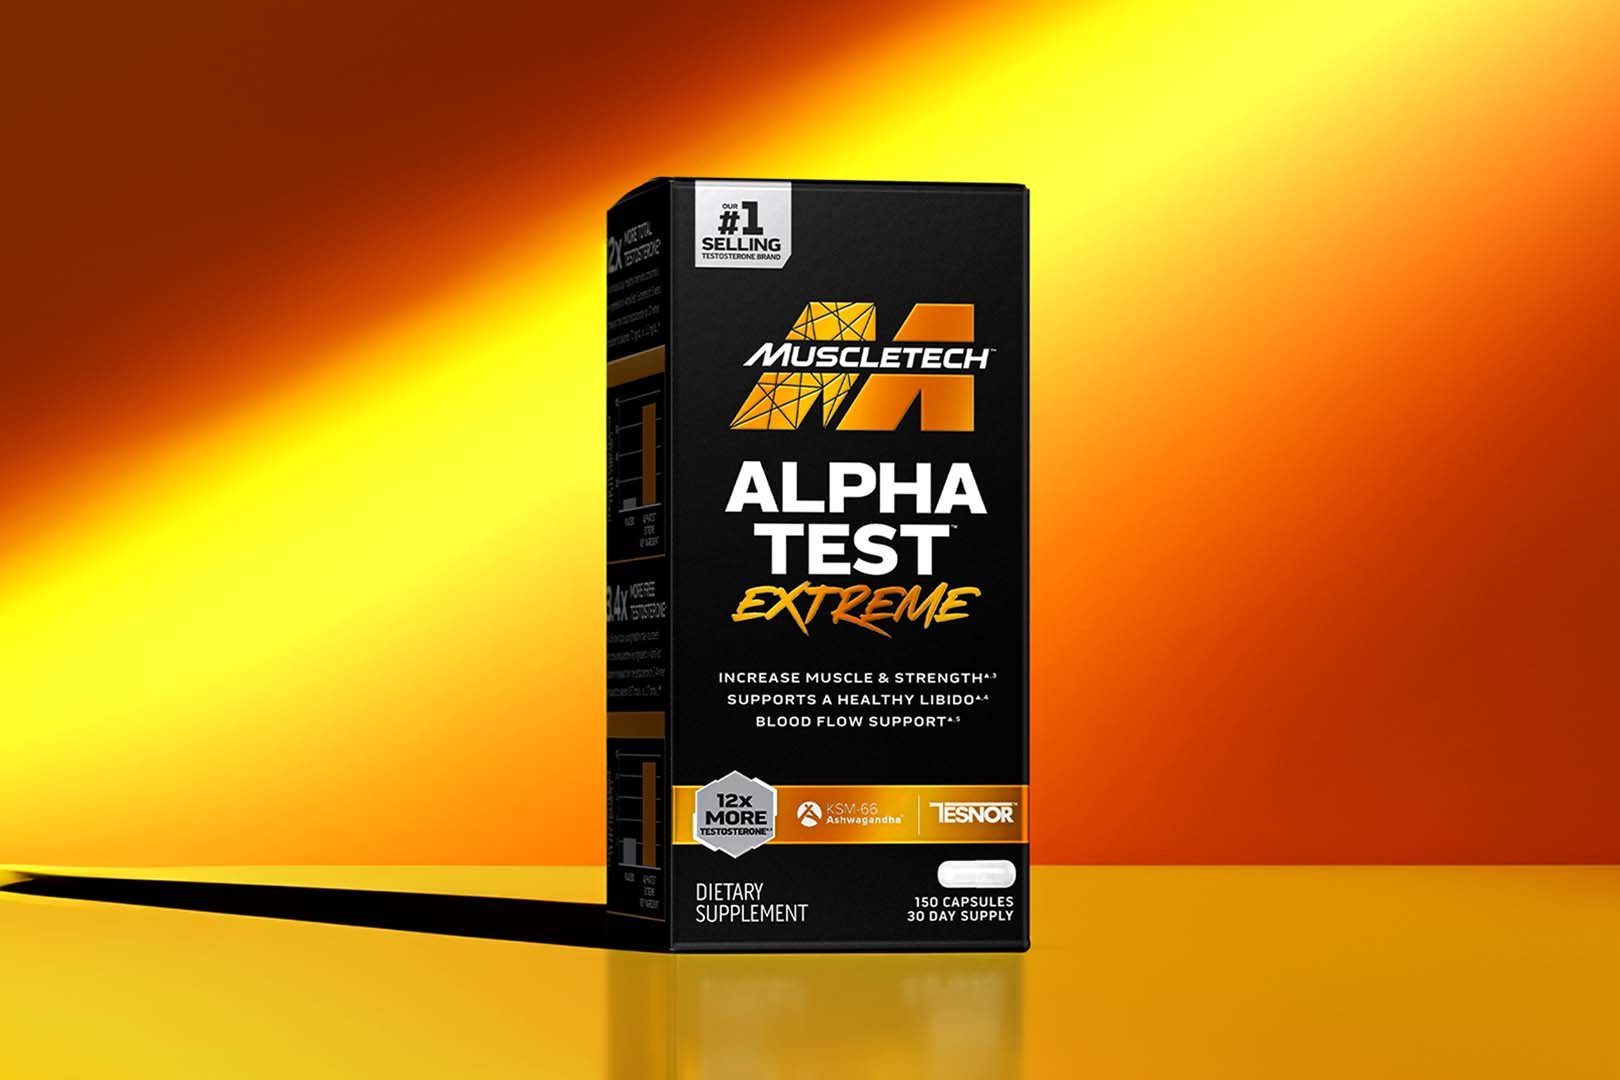 Muscletech Alphatest Extreme